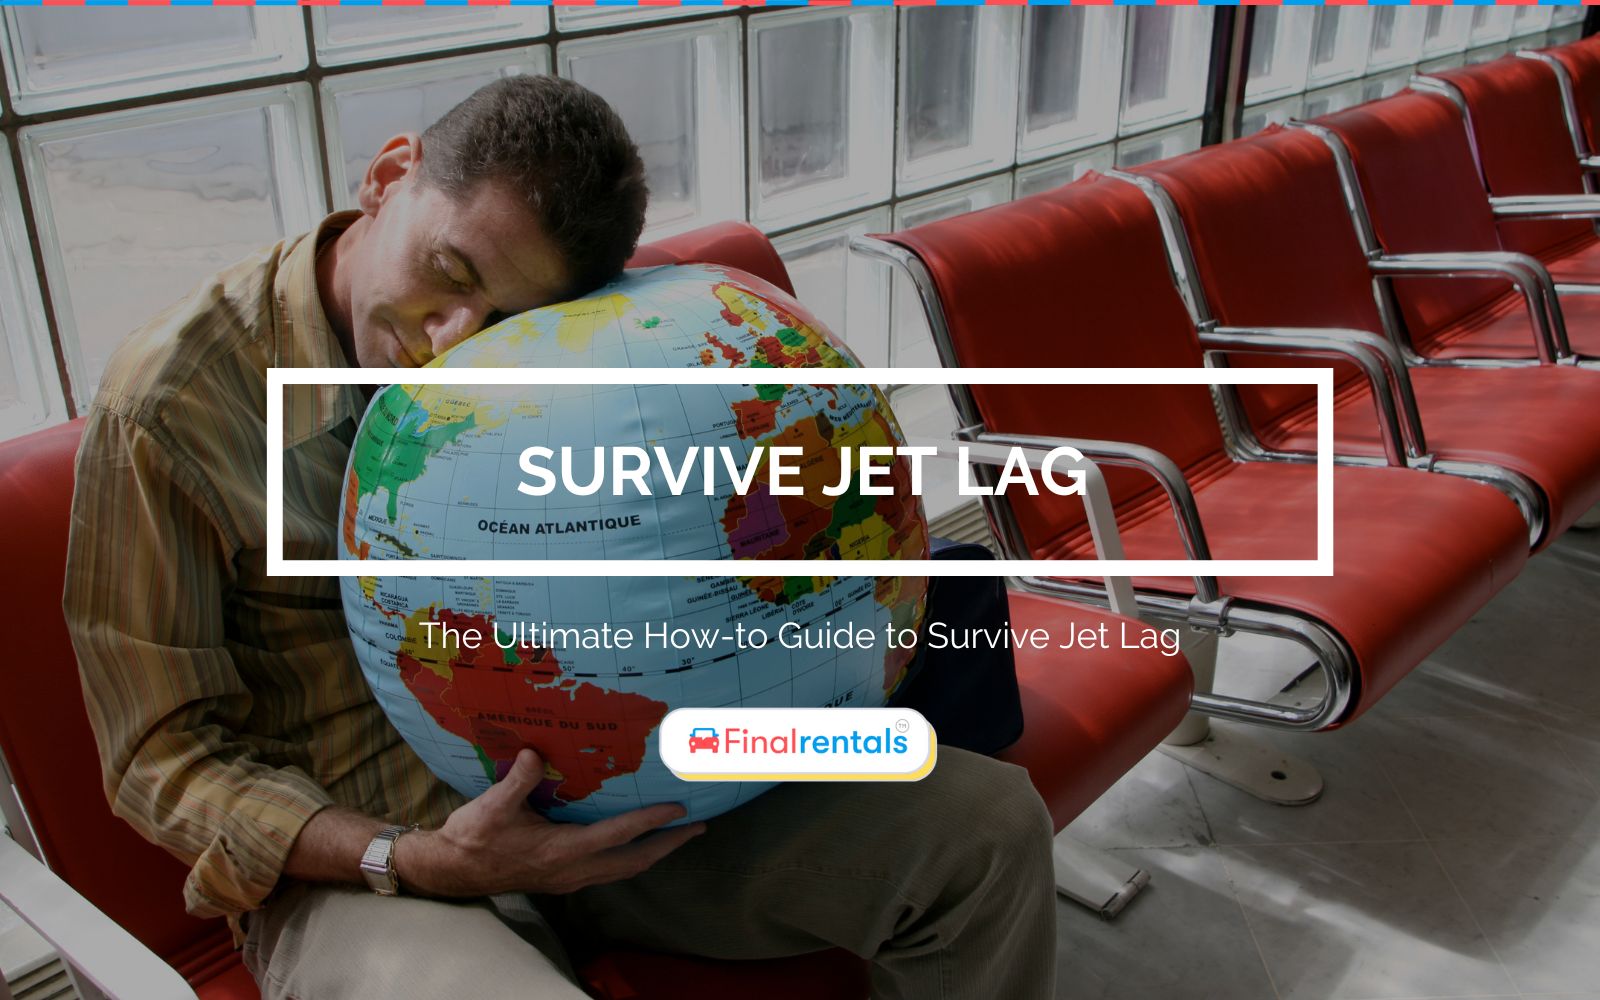 The Ultimate How-to Guide to Survive Jet Lag